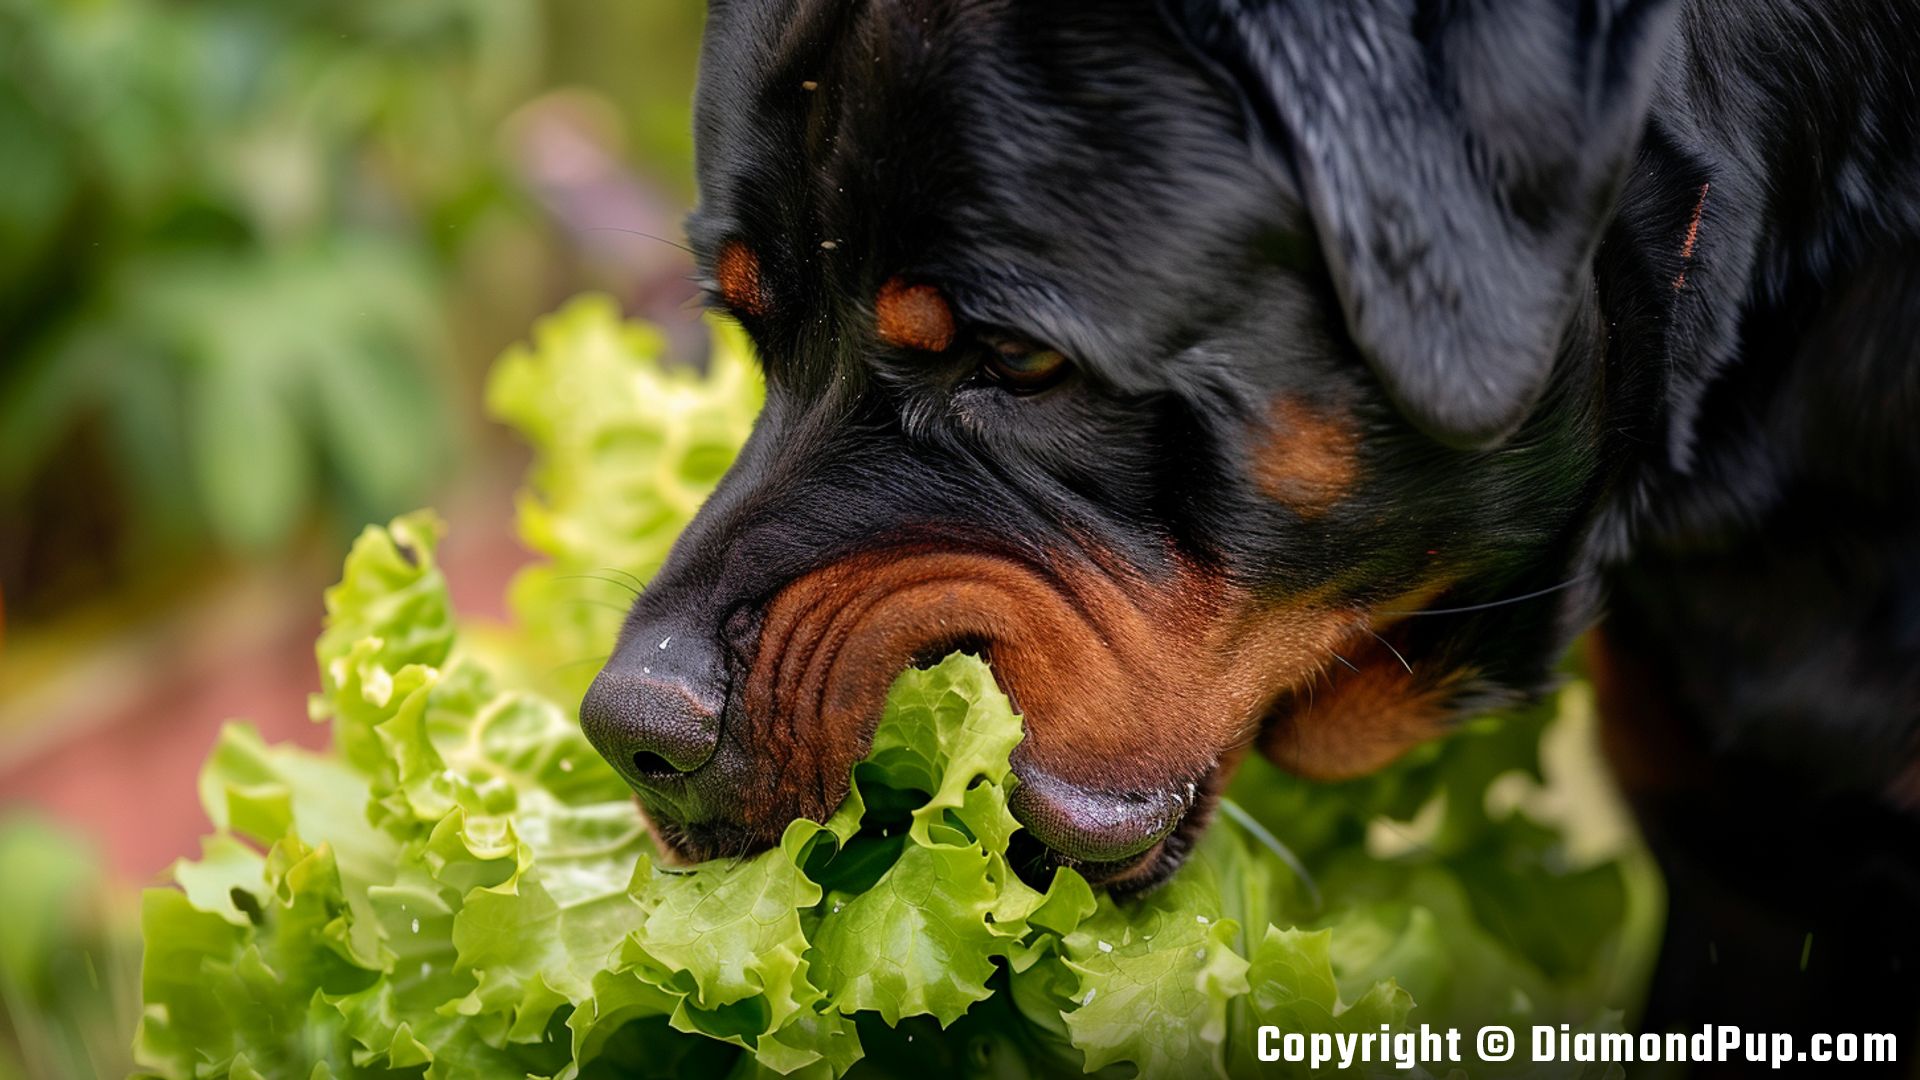 Photograph of a Happy Rottweiler Eating Lettuce